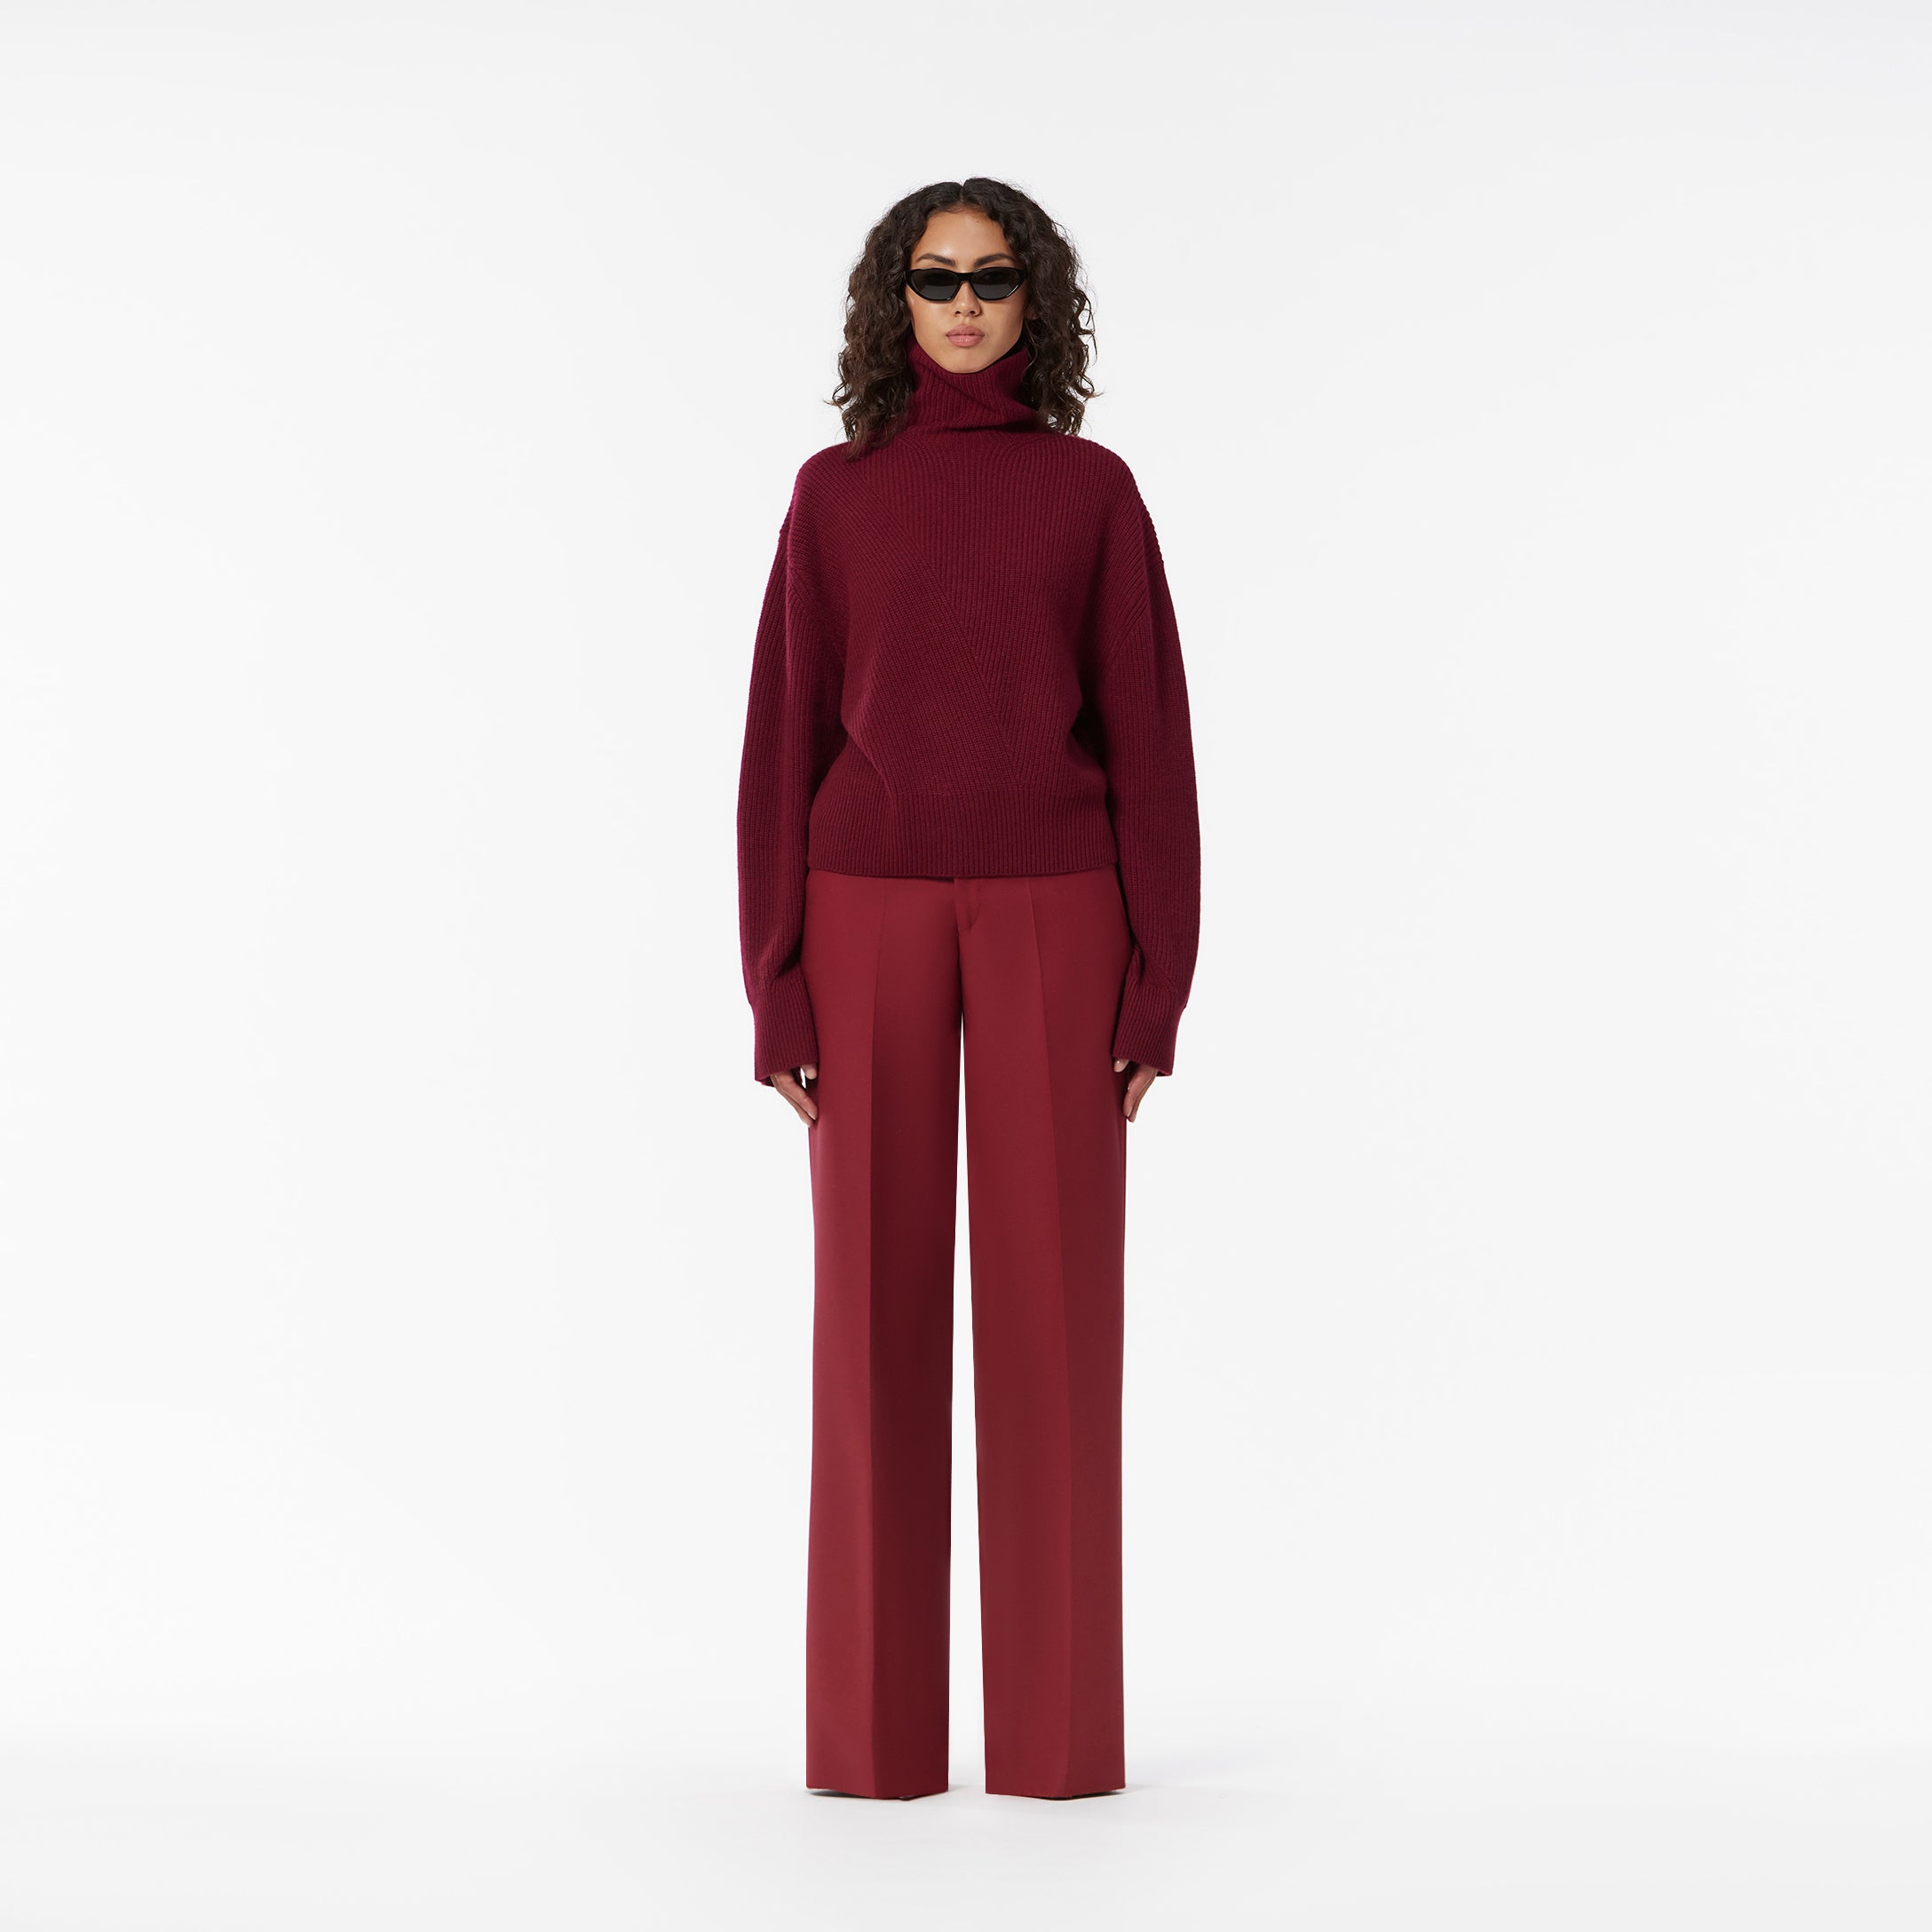 OVERSIZE CASHMERE SWEATER IN BORDEAUX – JACOB LEE